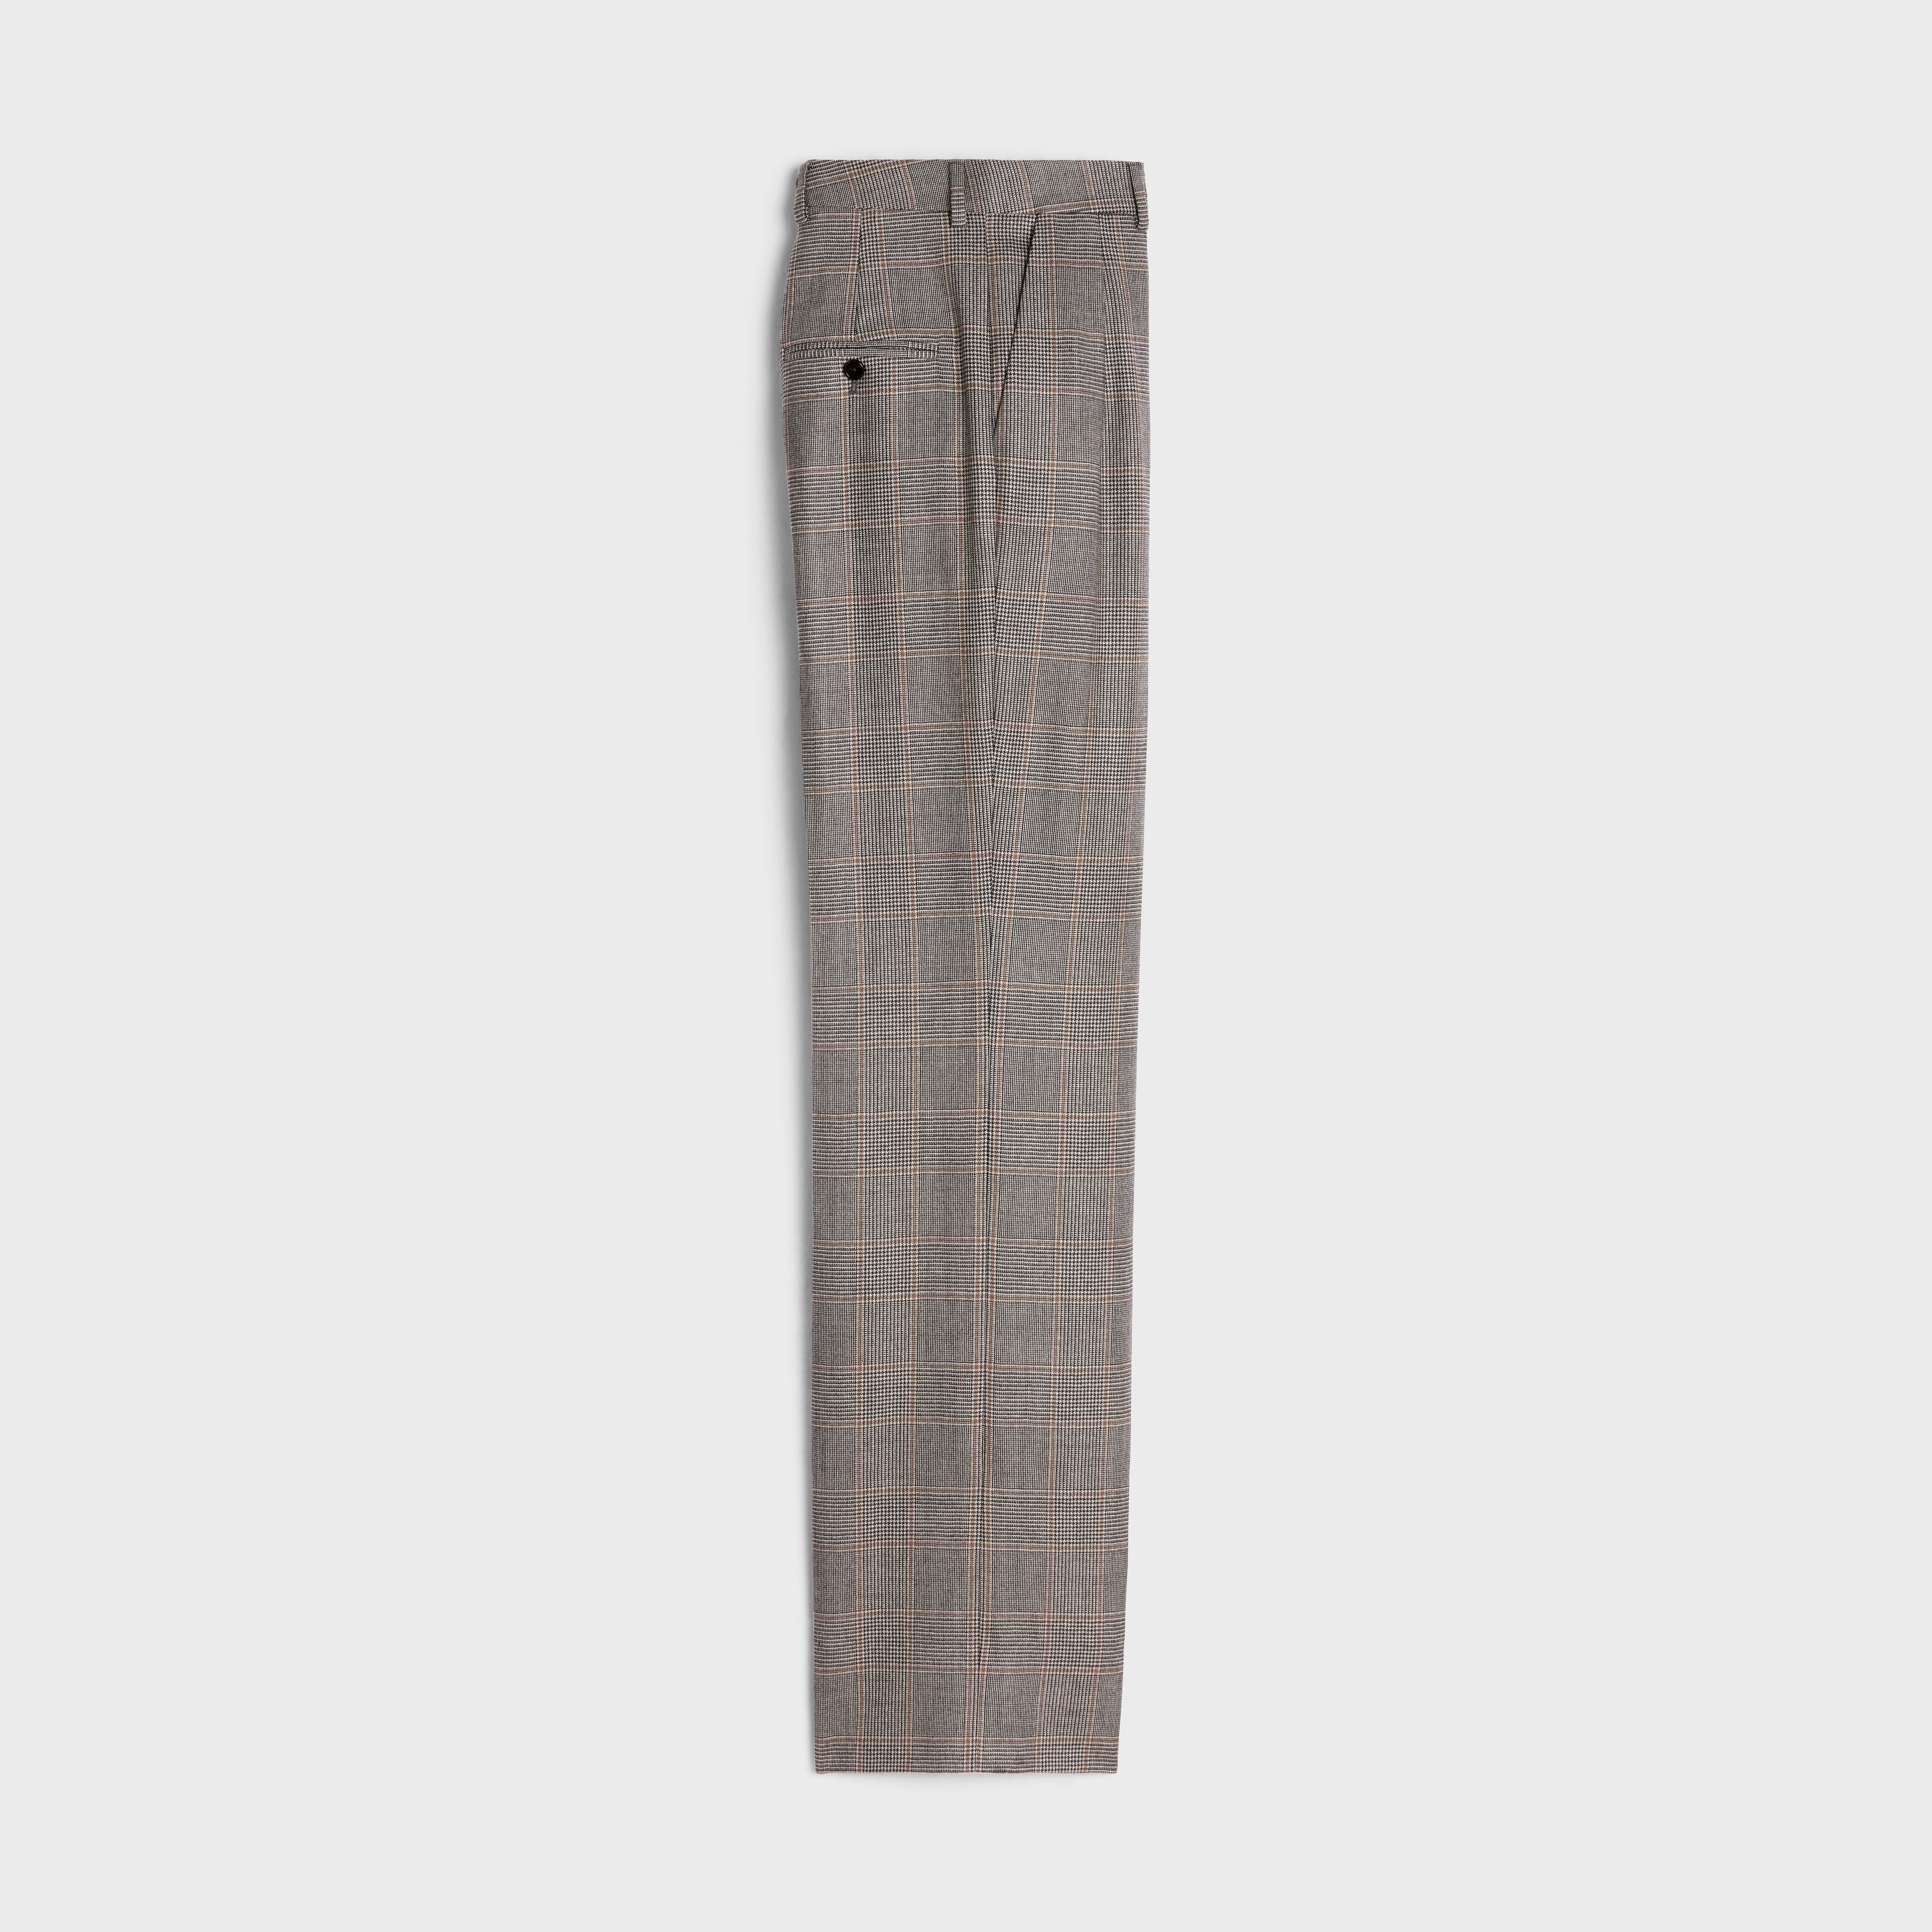 Tixie pants in Cashmere flannel